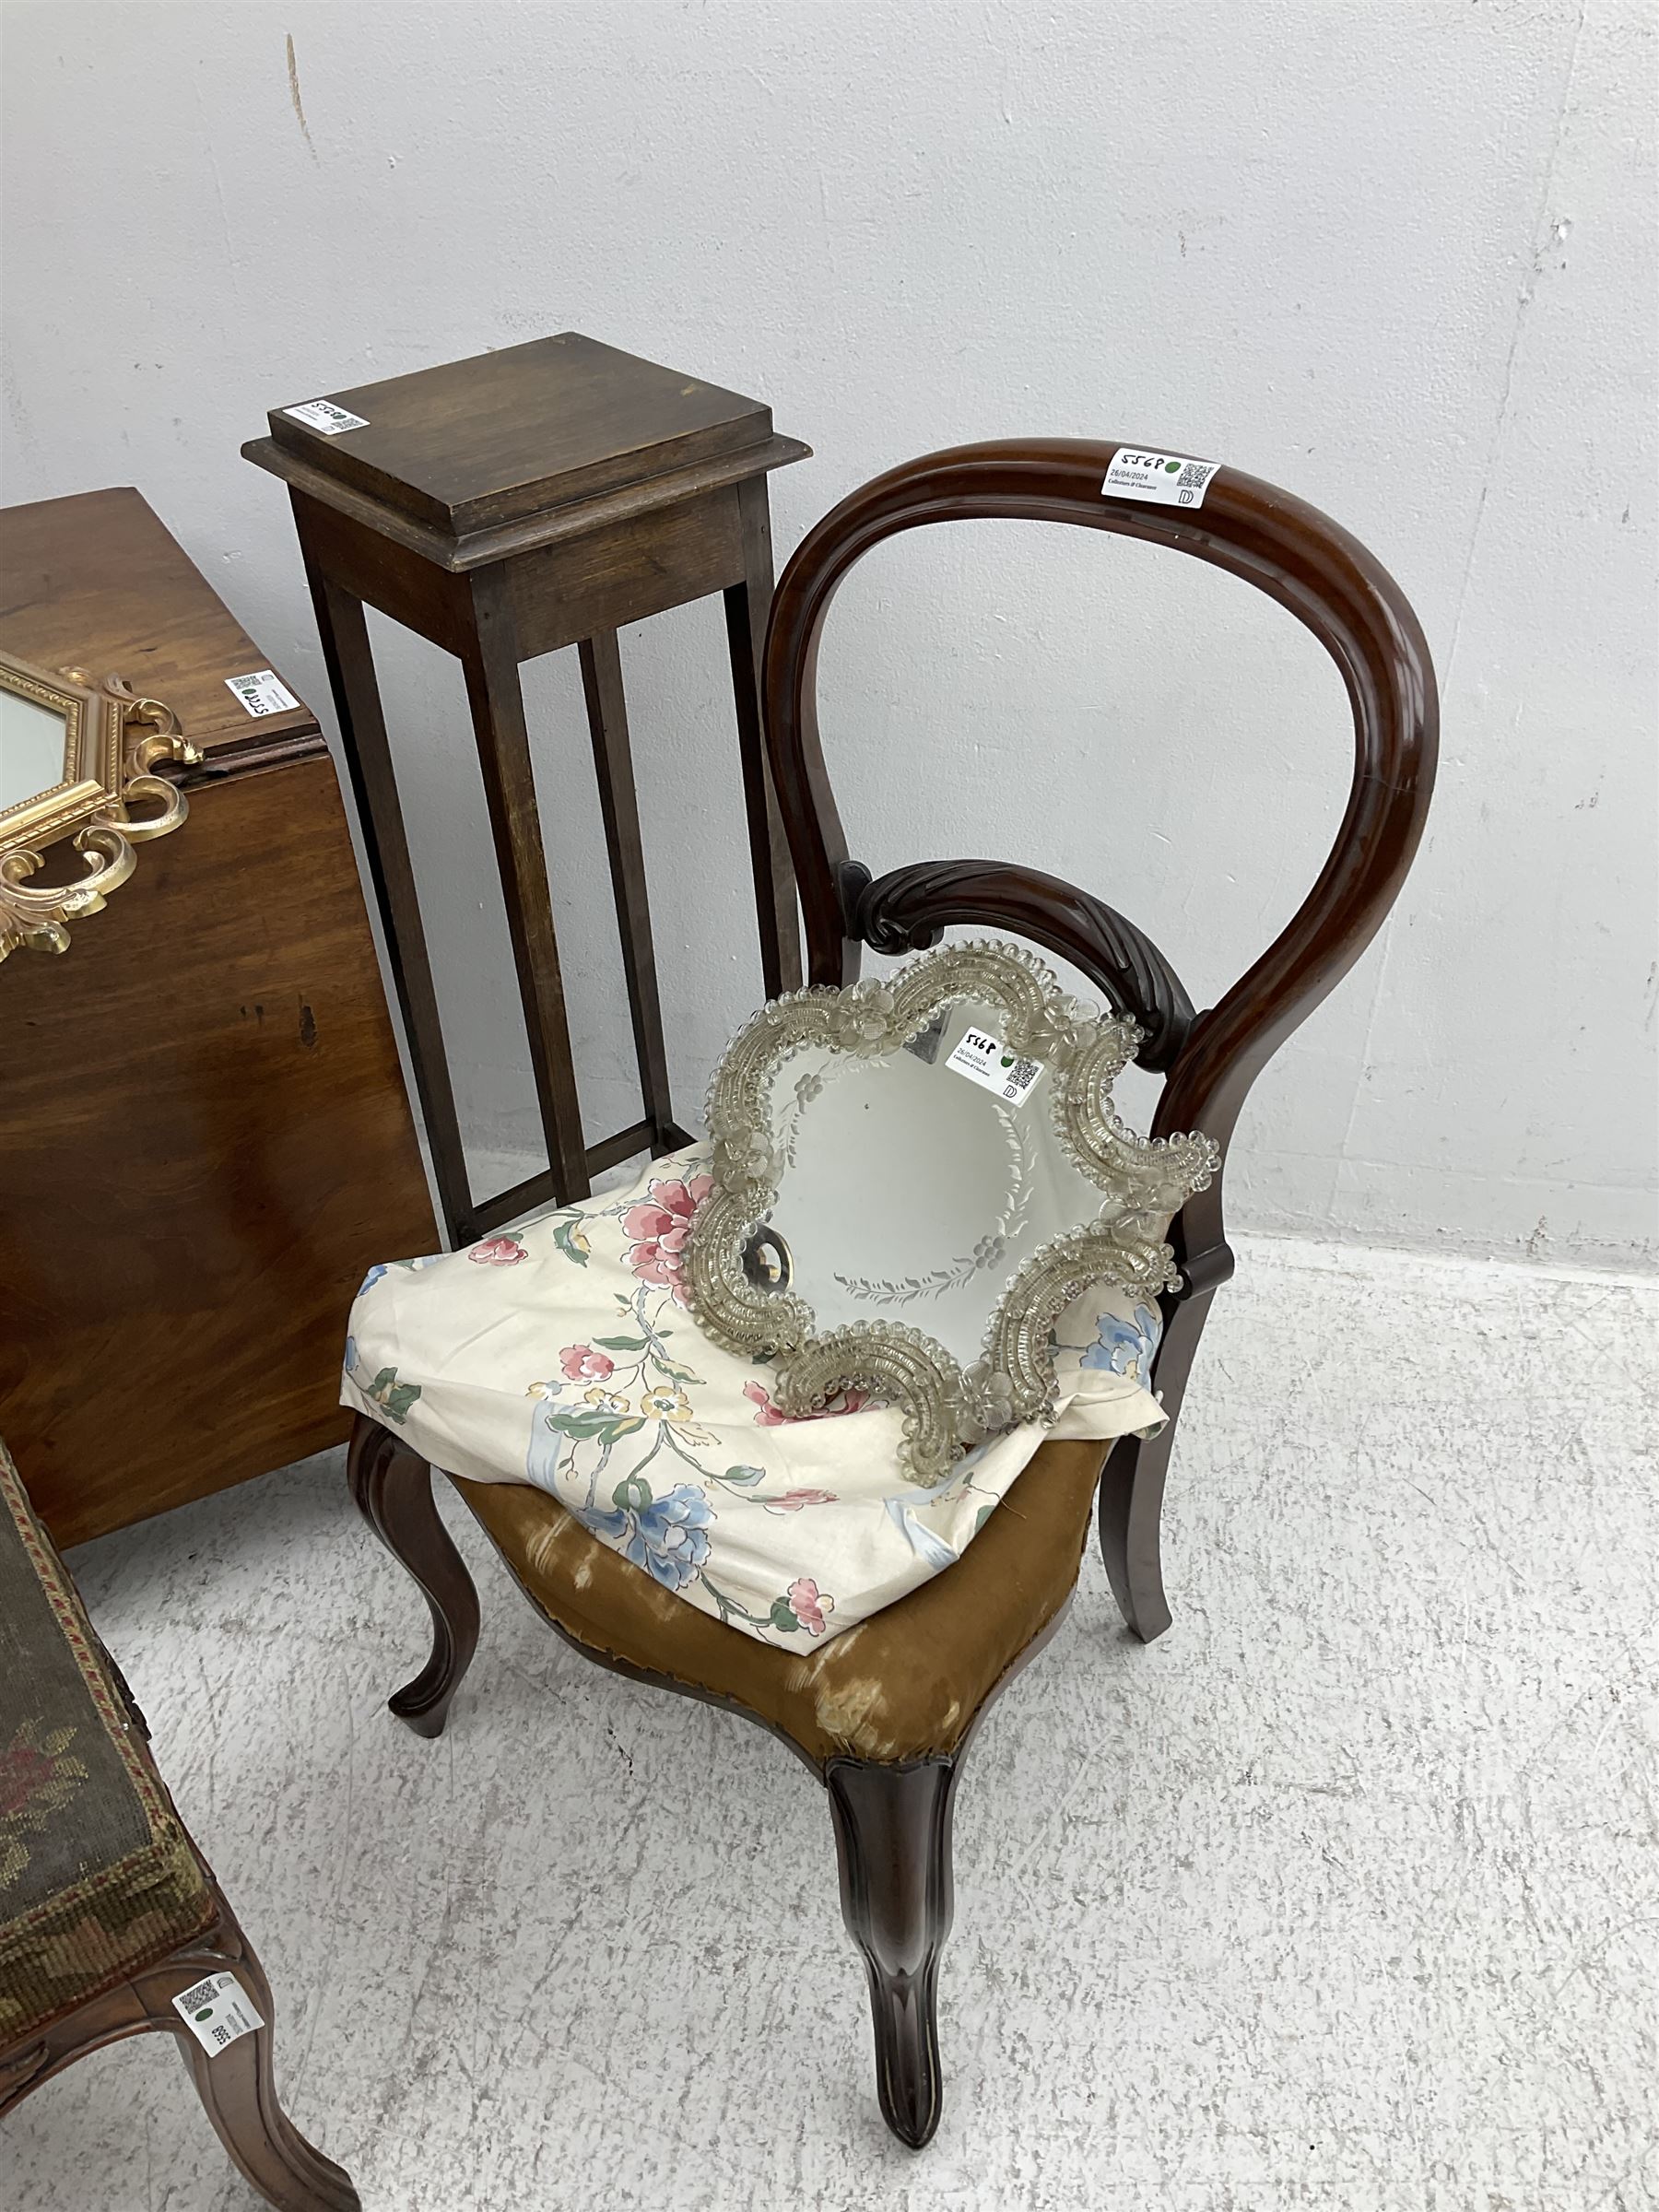 Lloyd Loom - rattan bedroom chair (W67cm H73cm); 19th century French walnut stool with tapestry seat - Image 7 of 10